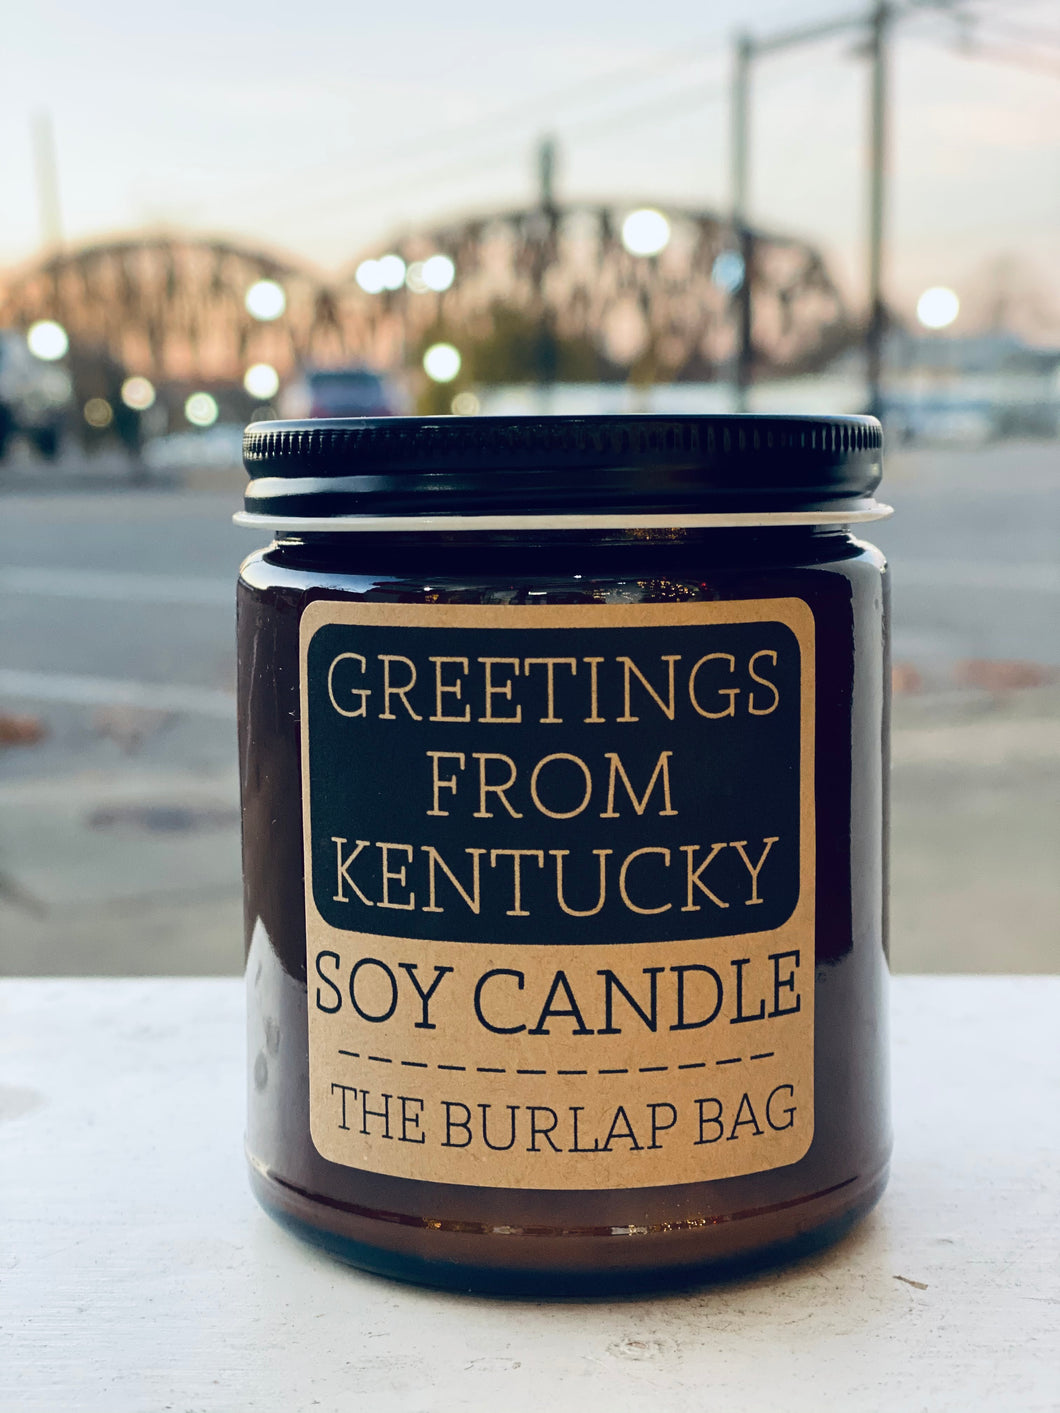 Greetings From Kentucky Soy Candle